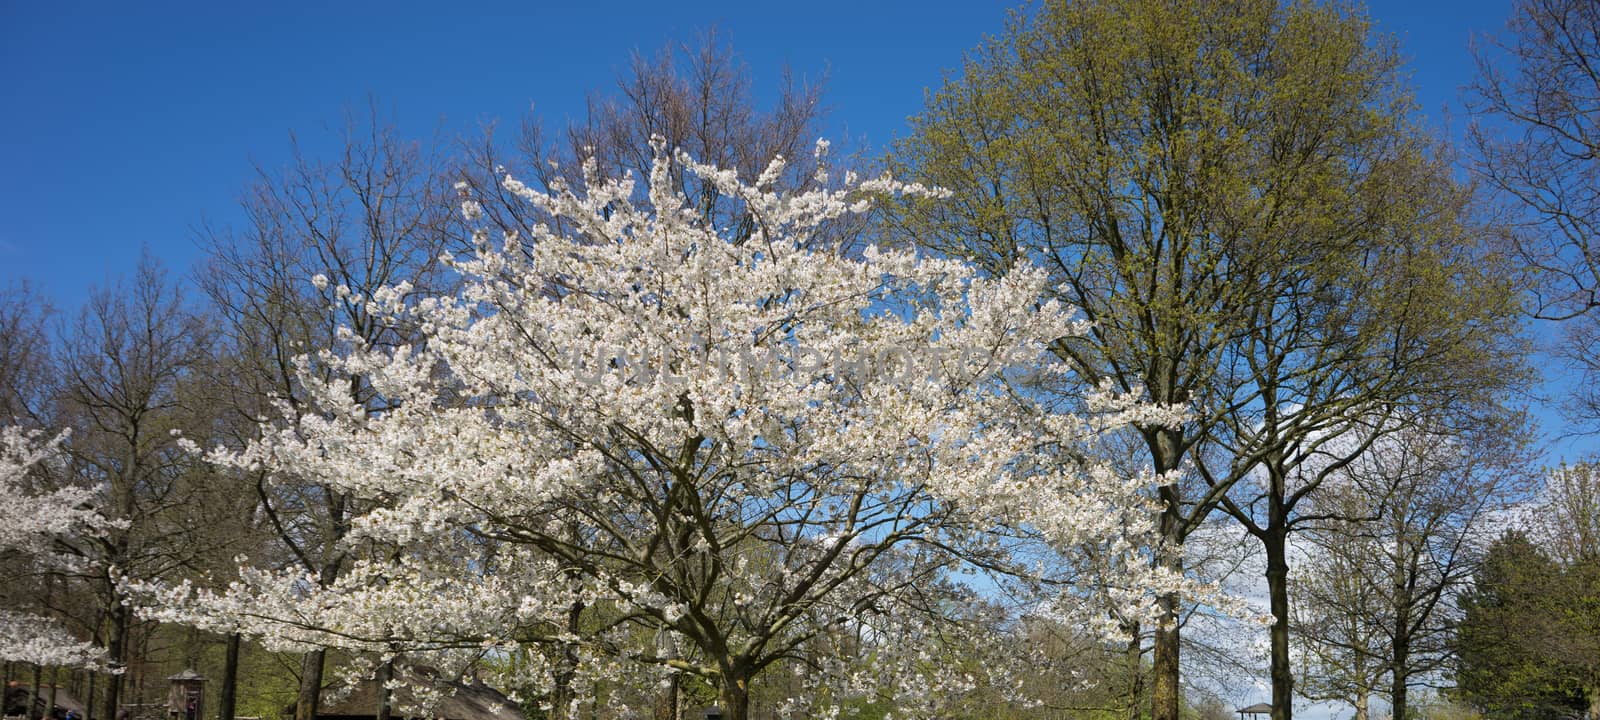 White cherry blossom tree against a blue sky in Lisse, Netherlands, Europe on a bright summer day